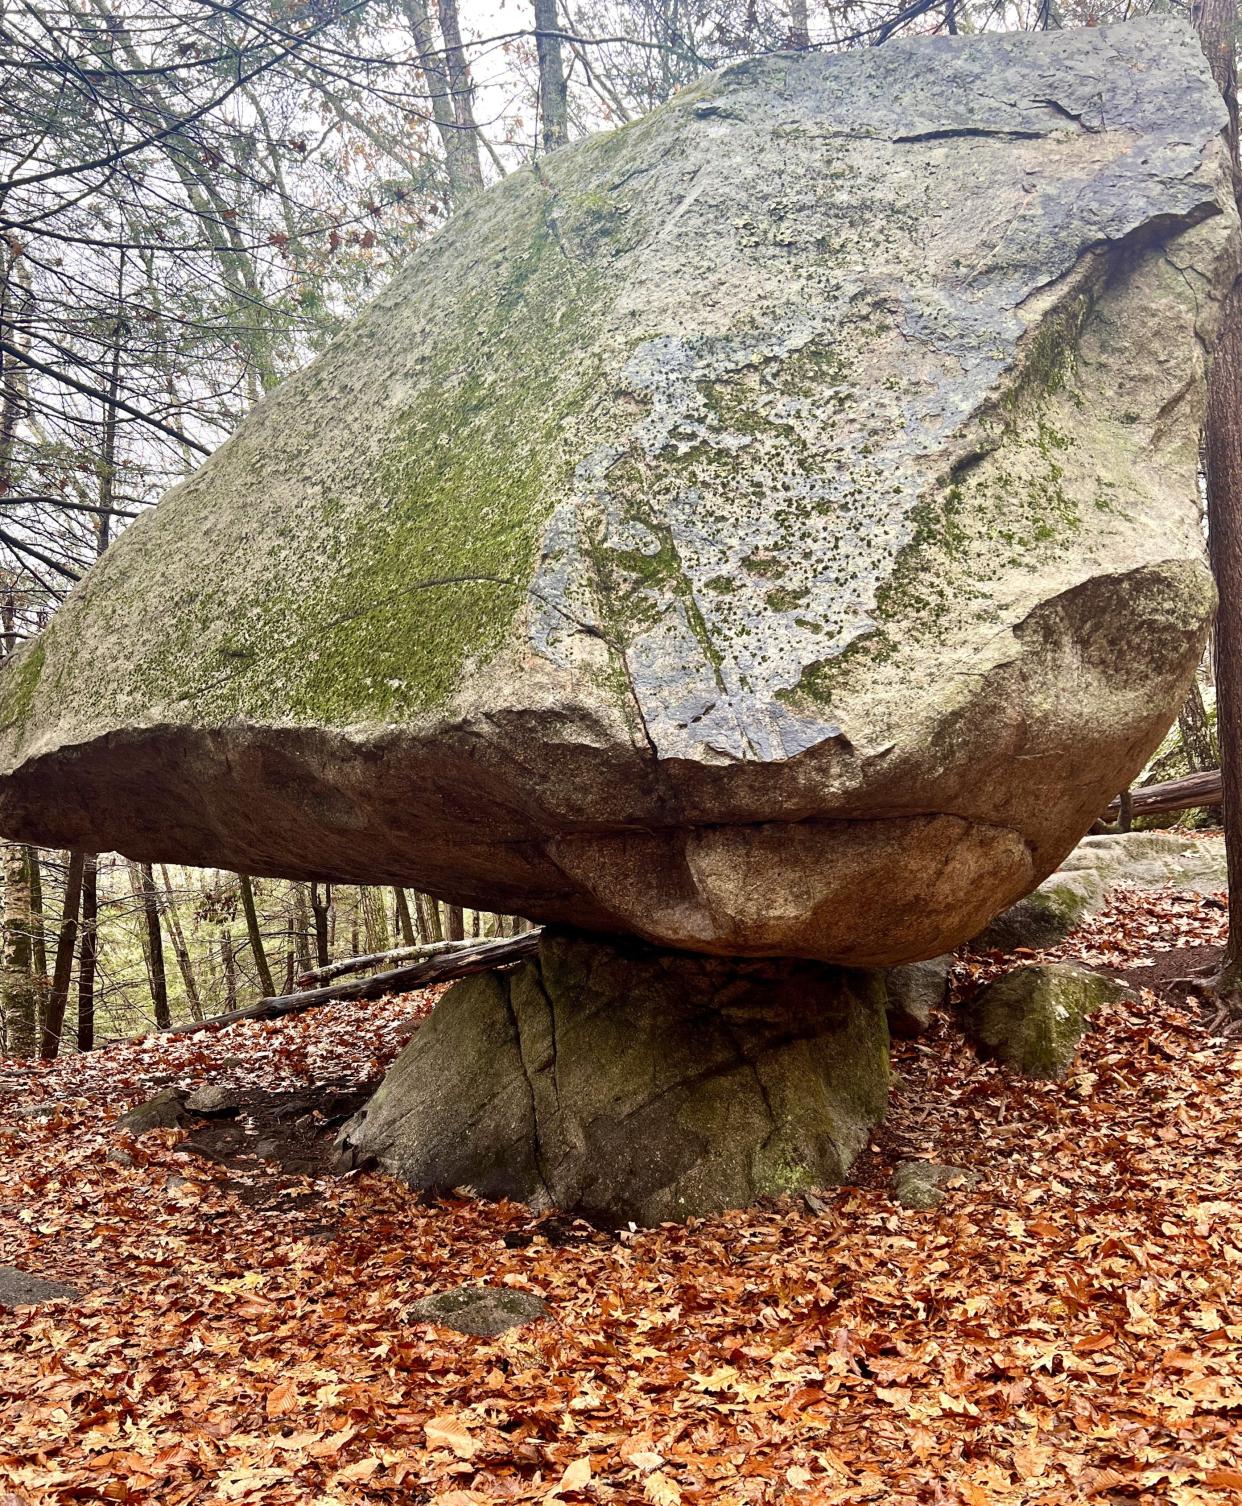 The balancing rock at Orris Falls Preserve is accessible from a short spur trail off the Orris Falls and Balancing Rock Trail in South Berwick, Maine.